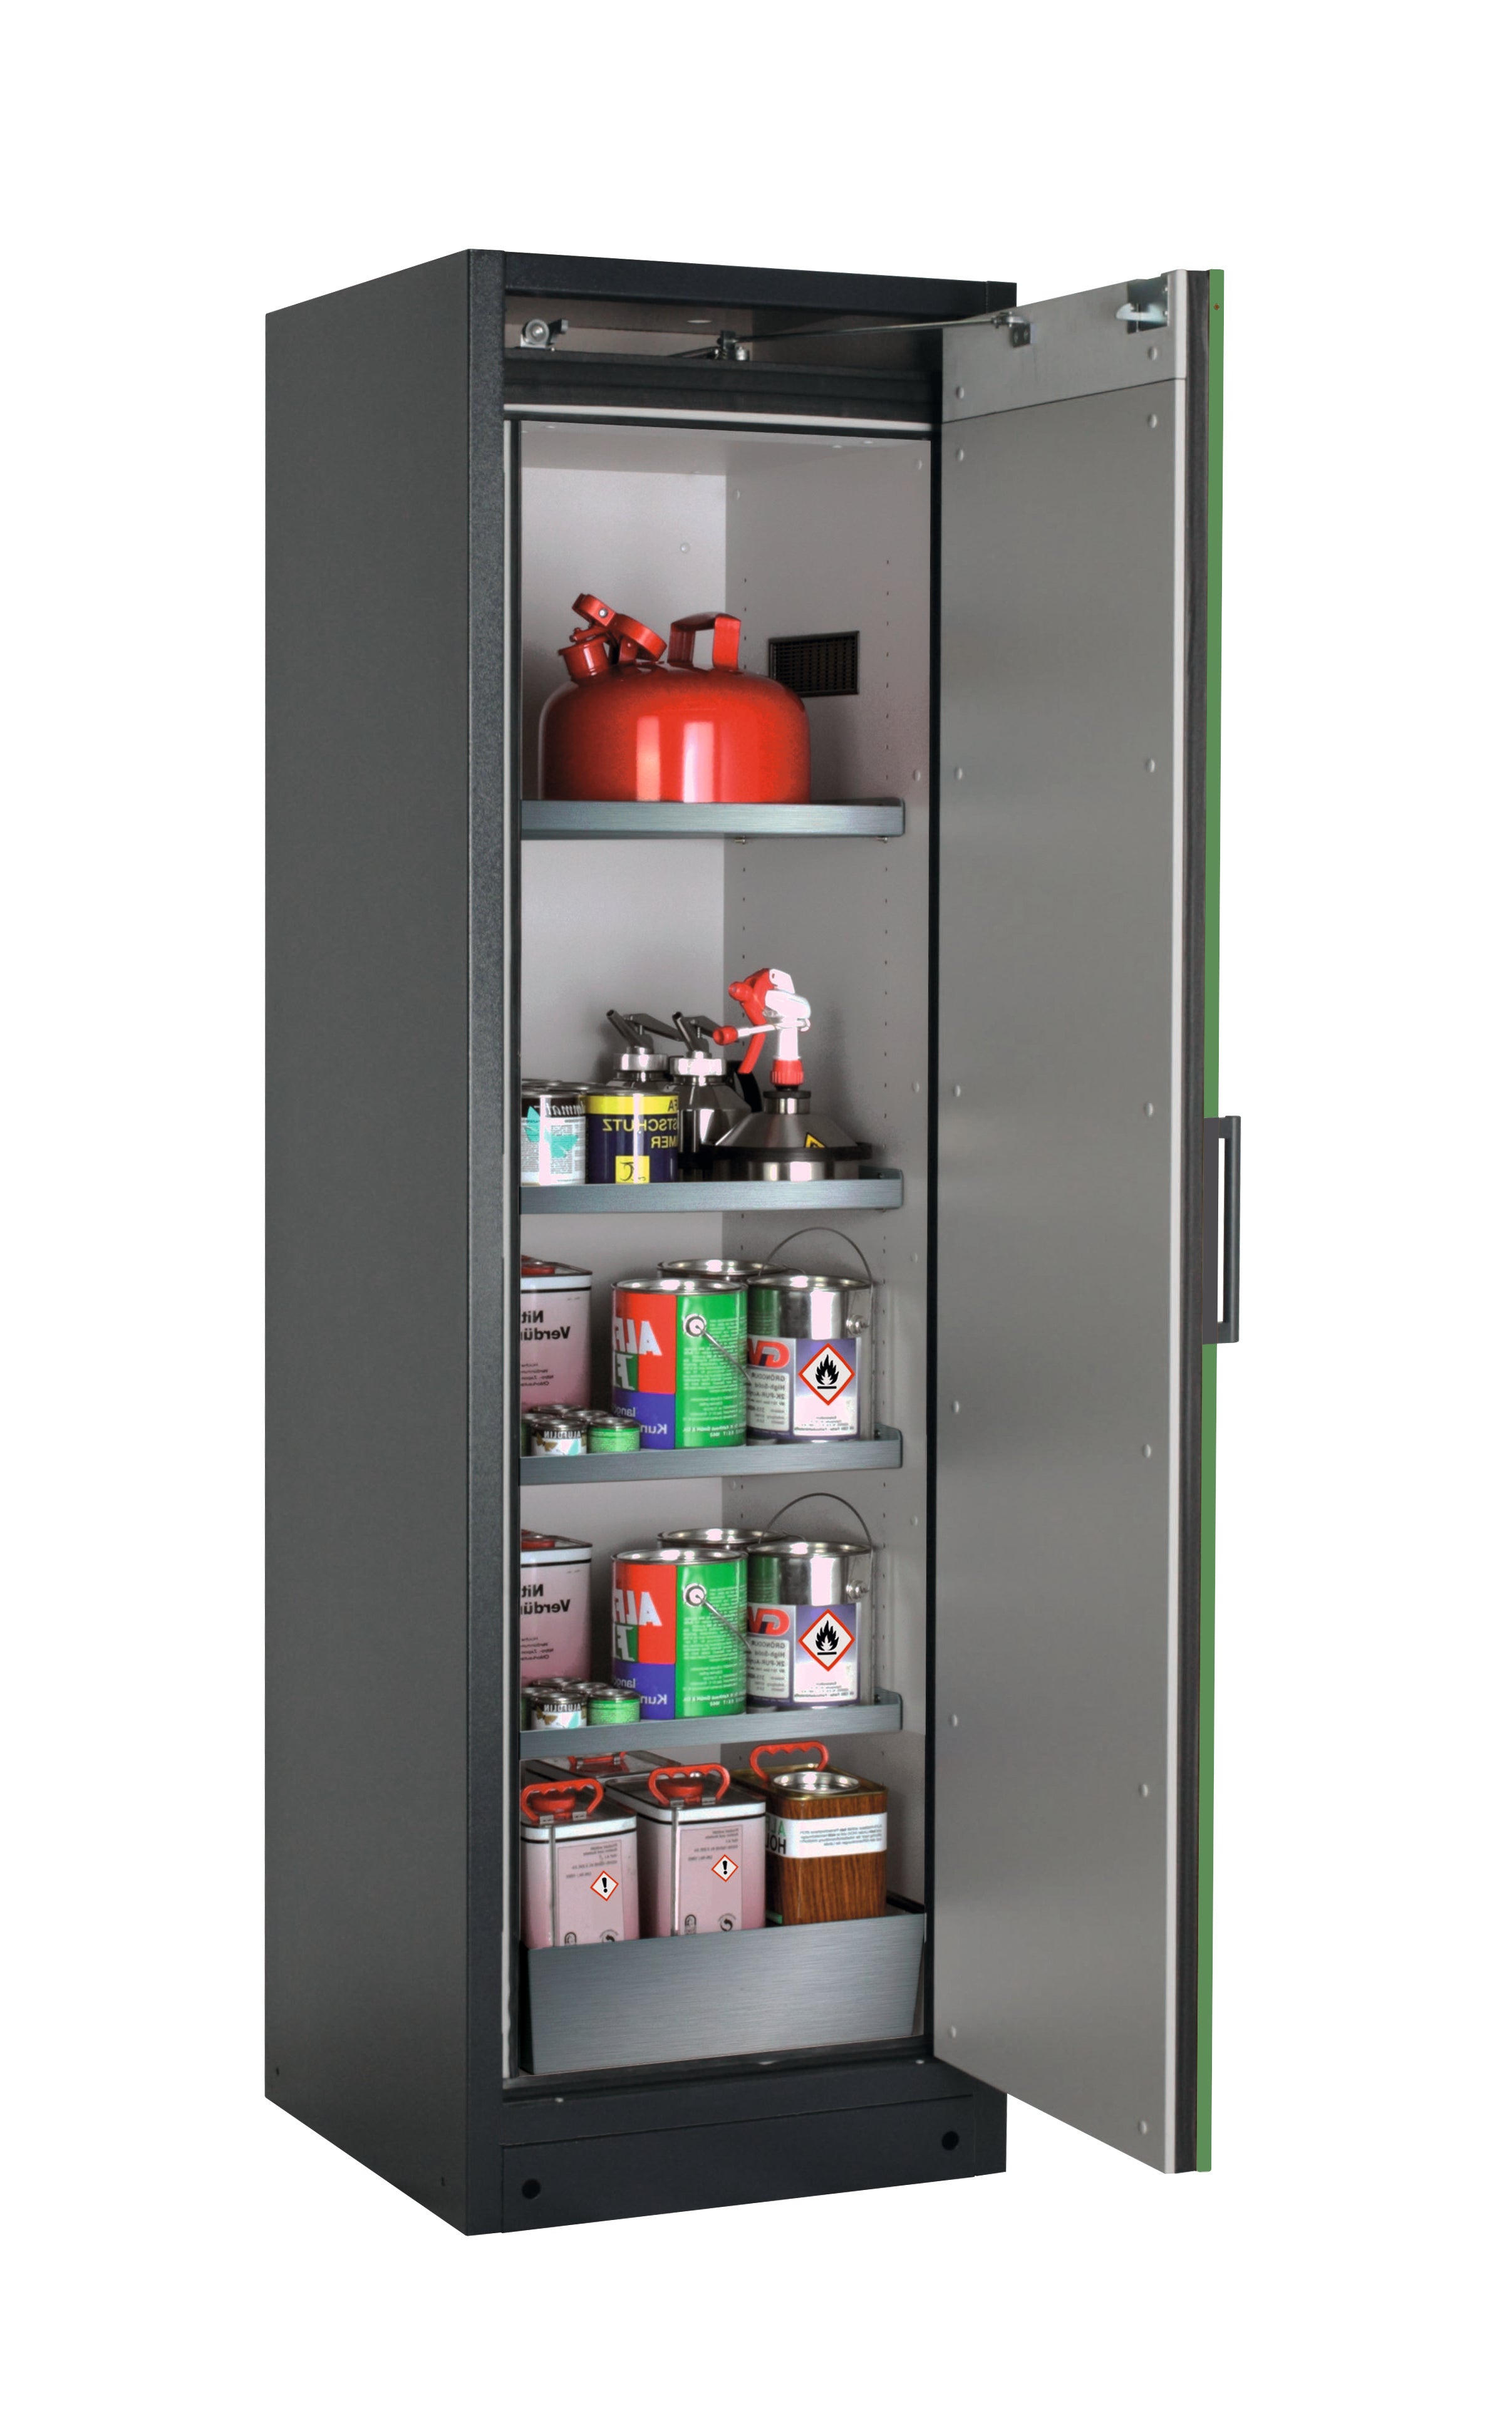 Type 90 safety storage cabinet Q-CLASSIC-90 model Q90.195.060.R in reseda green RAL 6011 with 4x shelf standard (stainless steel 1.4301),